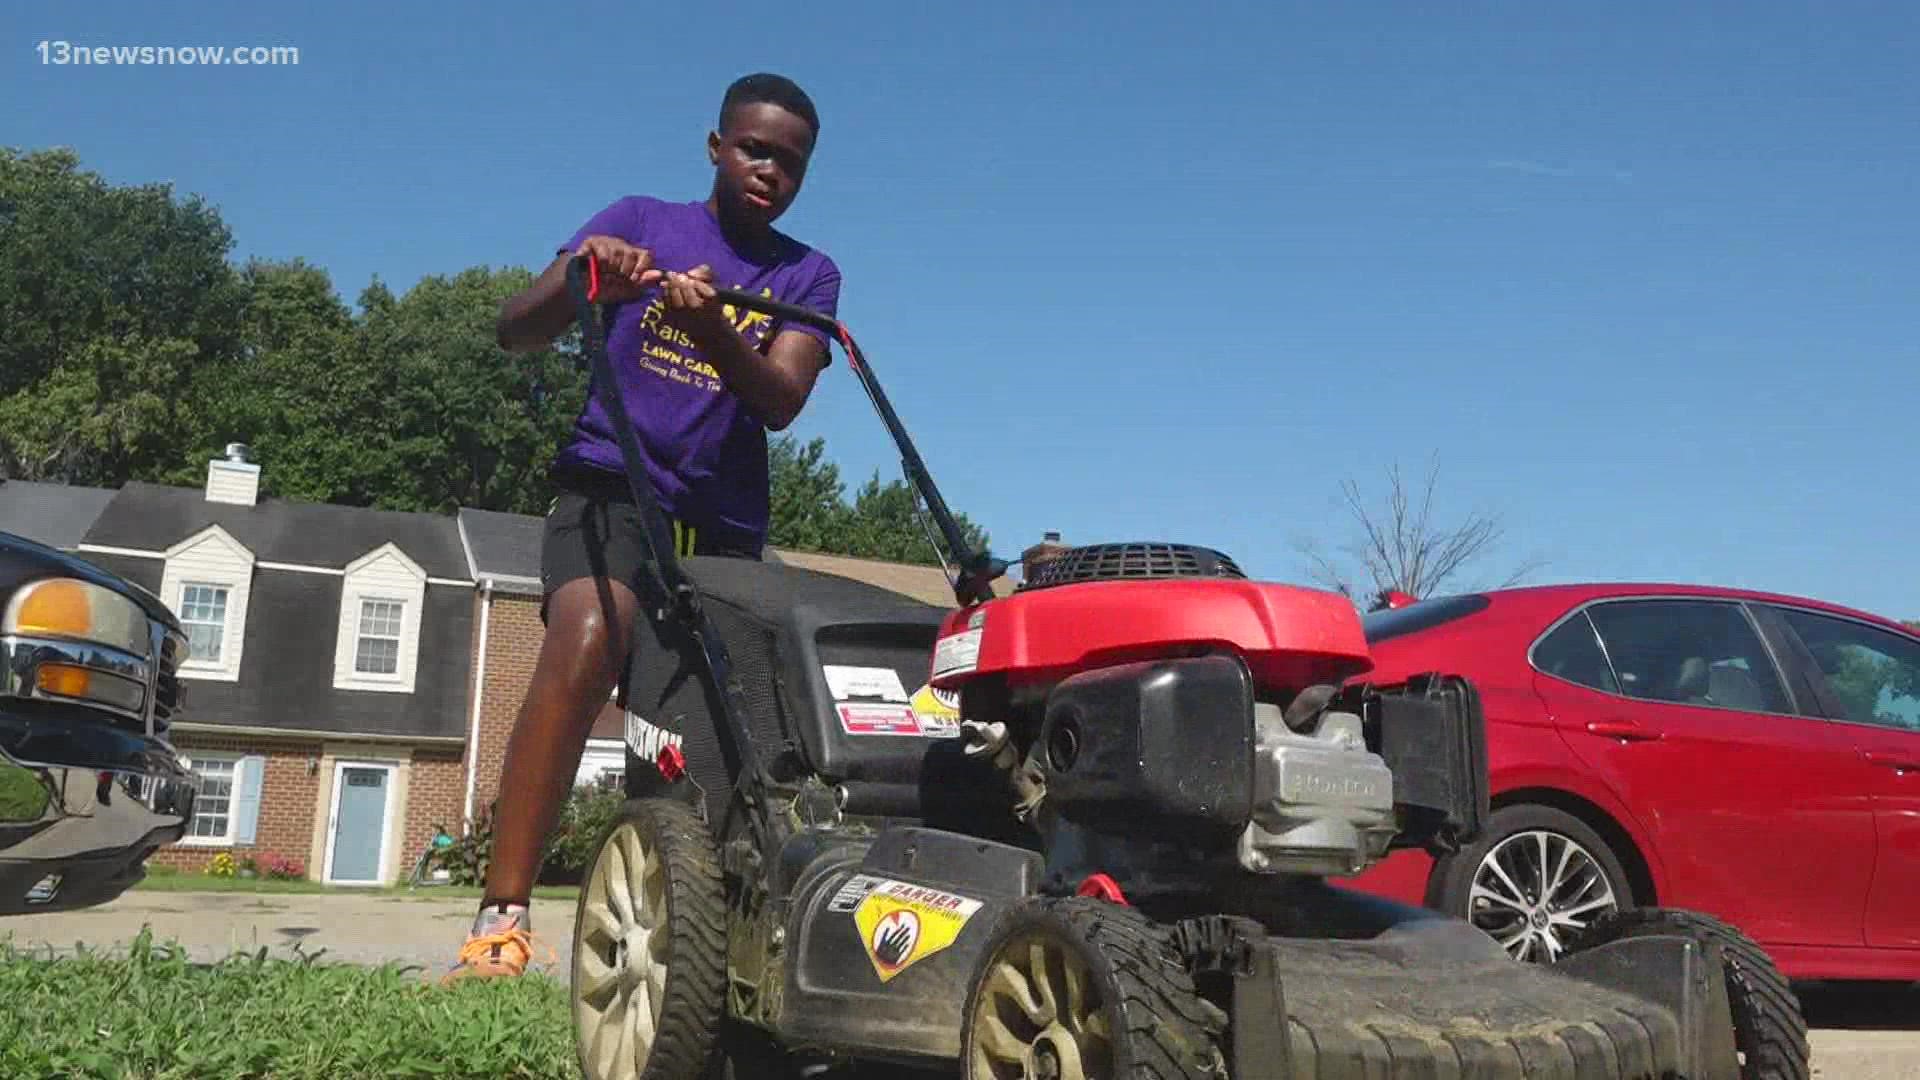 Phoenix Browne is giving back to his community by cutting yards for the elderly, single parents, the disabled, and veterans.